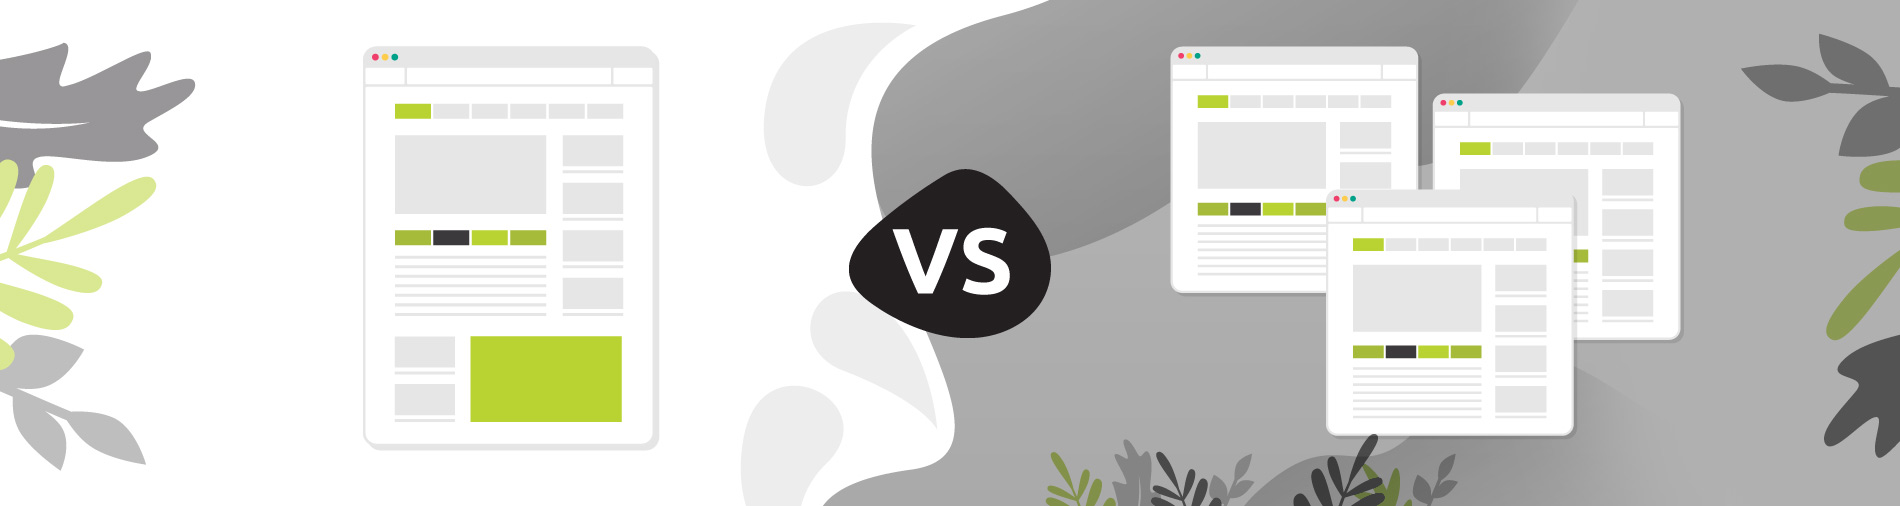 Single-Page versus Multi-page Websites: The Pros and Cons